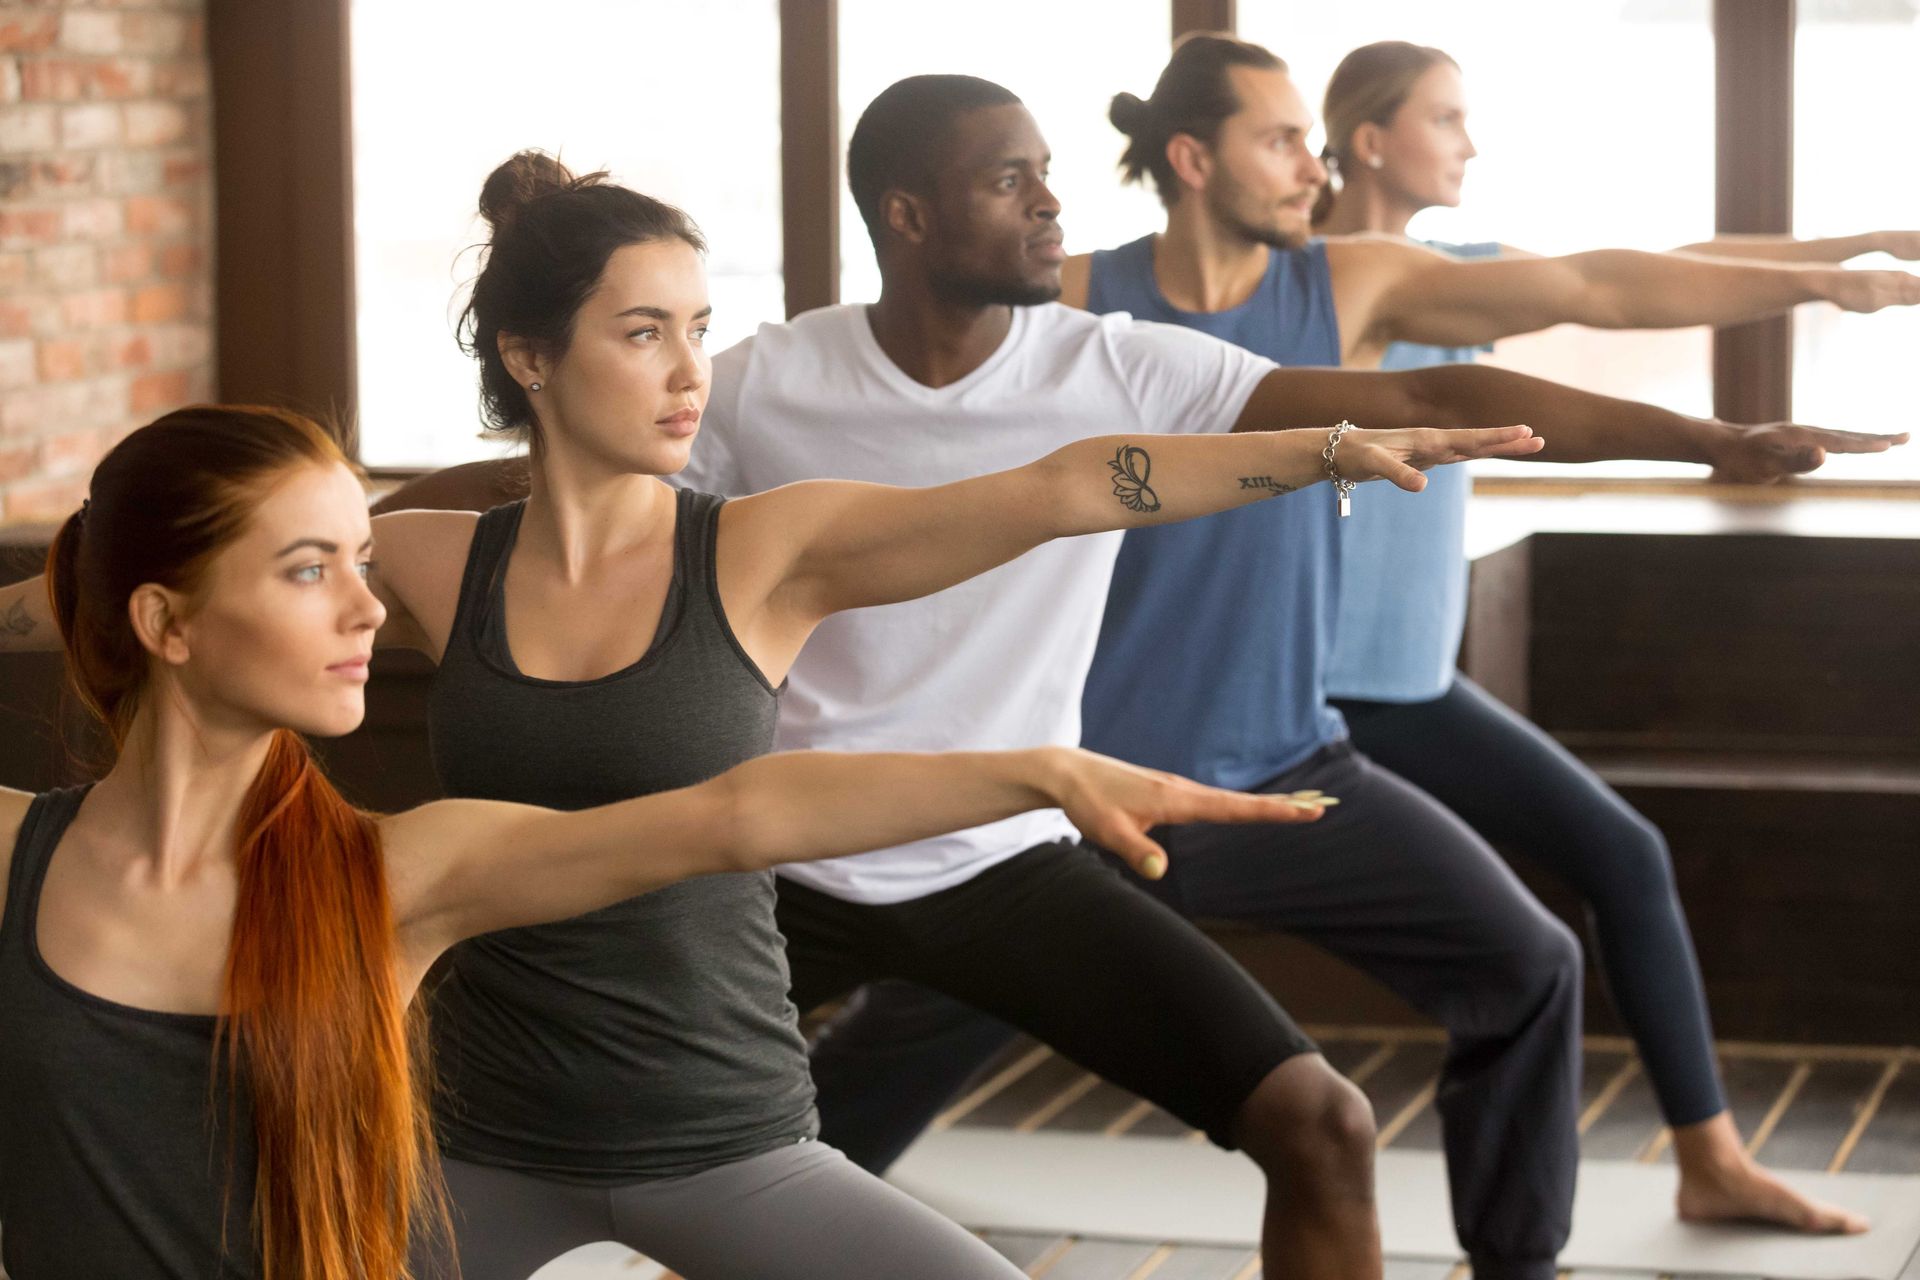 a group of people are doing yoga together in a gym